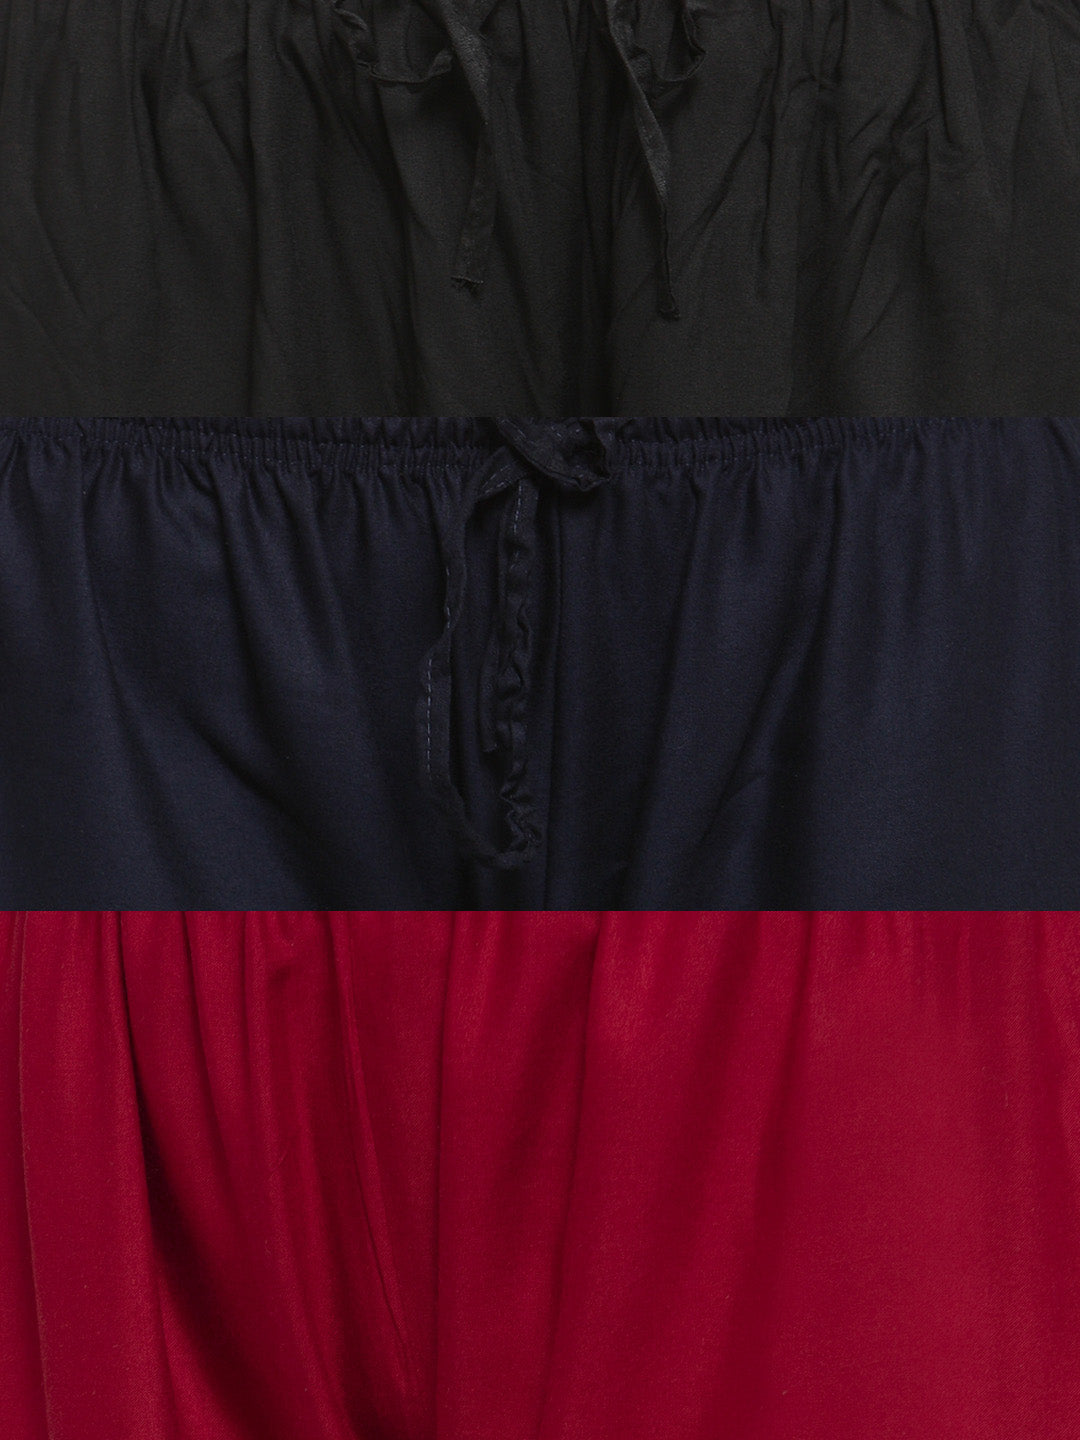 Clora Solid Black, Navy Blue & Red Rayon Palazzo (Pack Of 3)